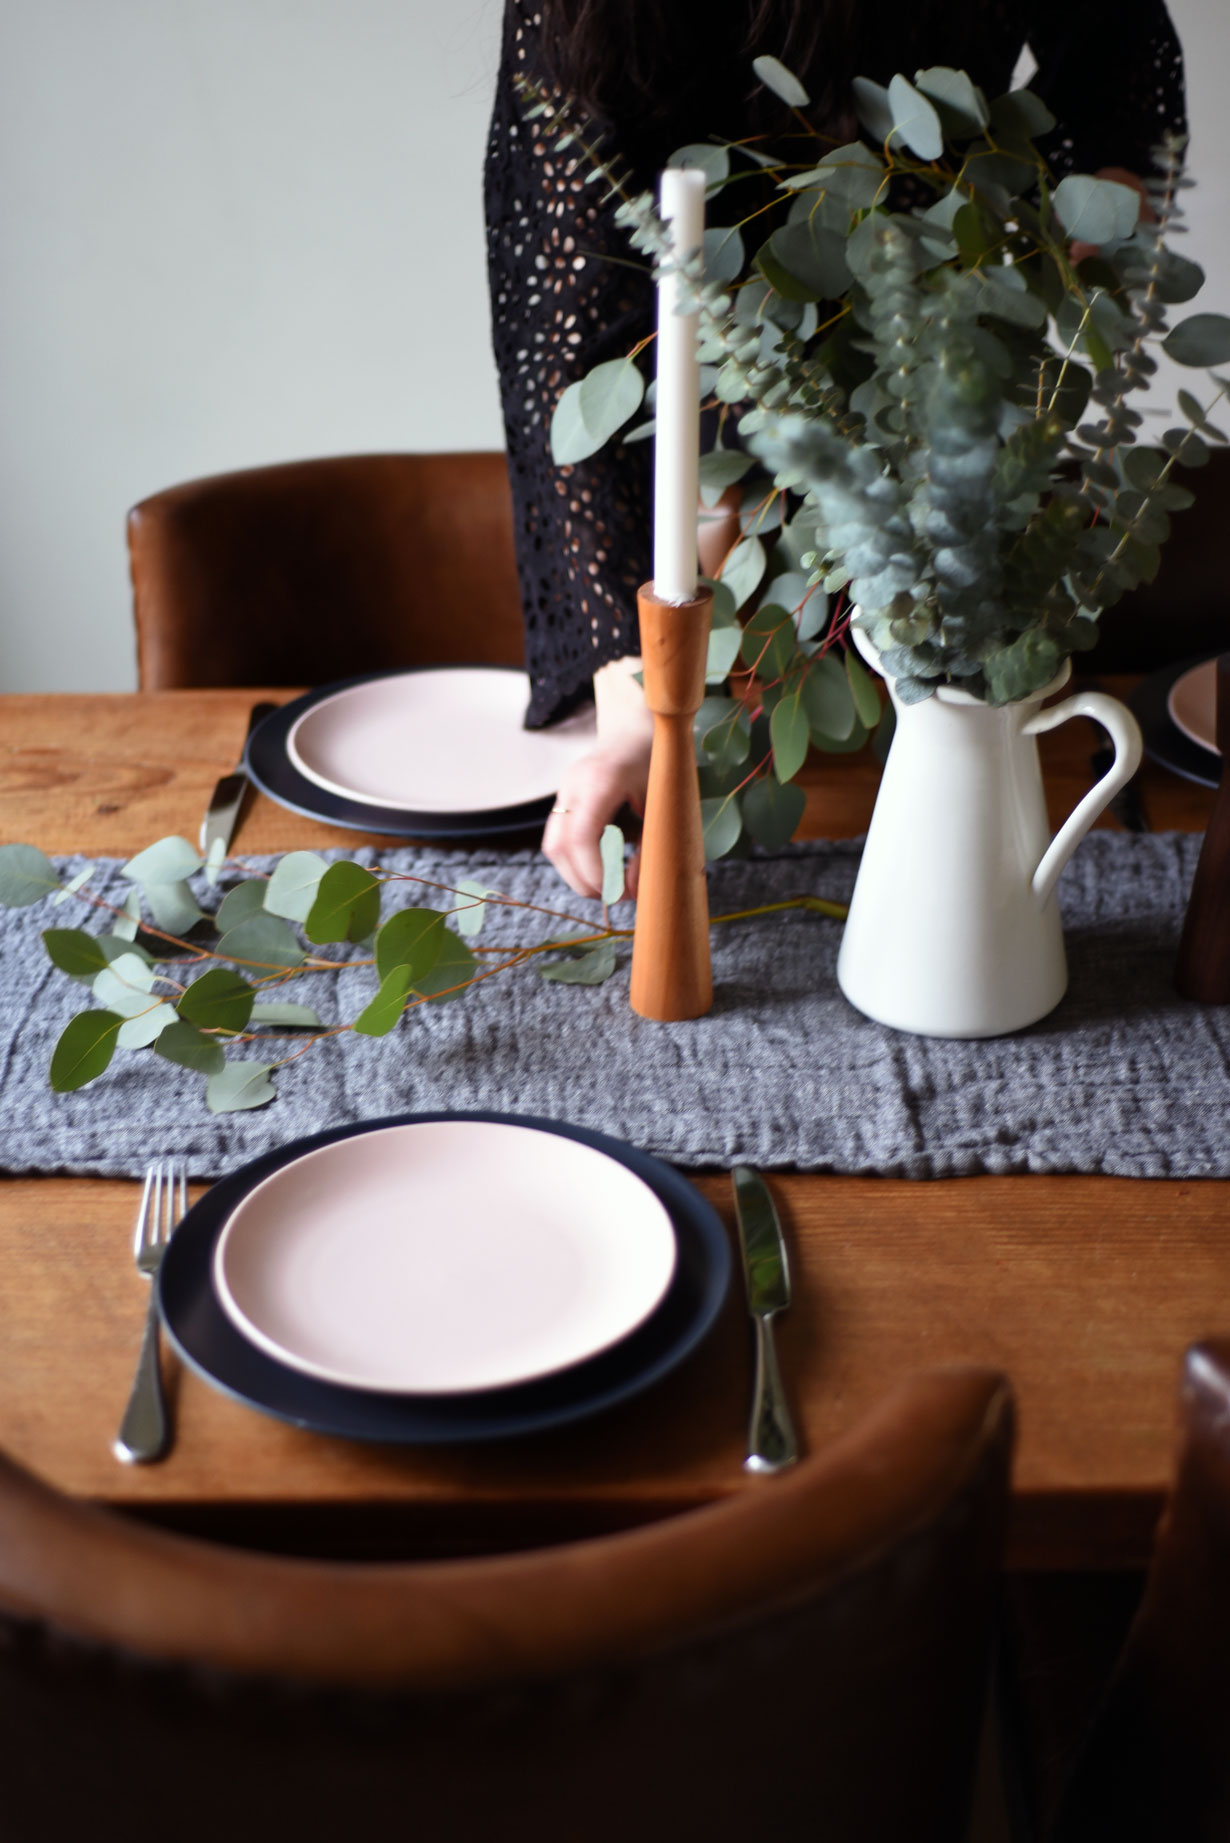 Having people over should be fun, not stressful. We've got you covered with 5 fun ideas for throwing a dinner party that's easy, laid back, but still feels like a million bucks. Read on to learn more.